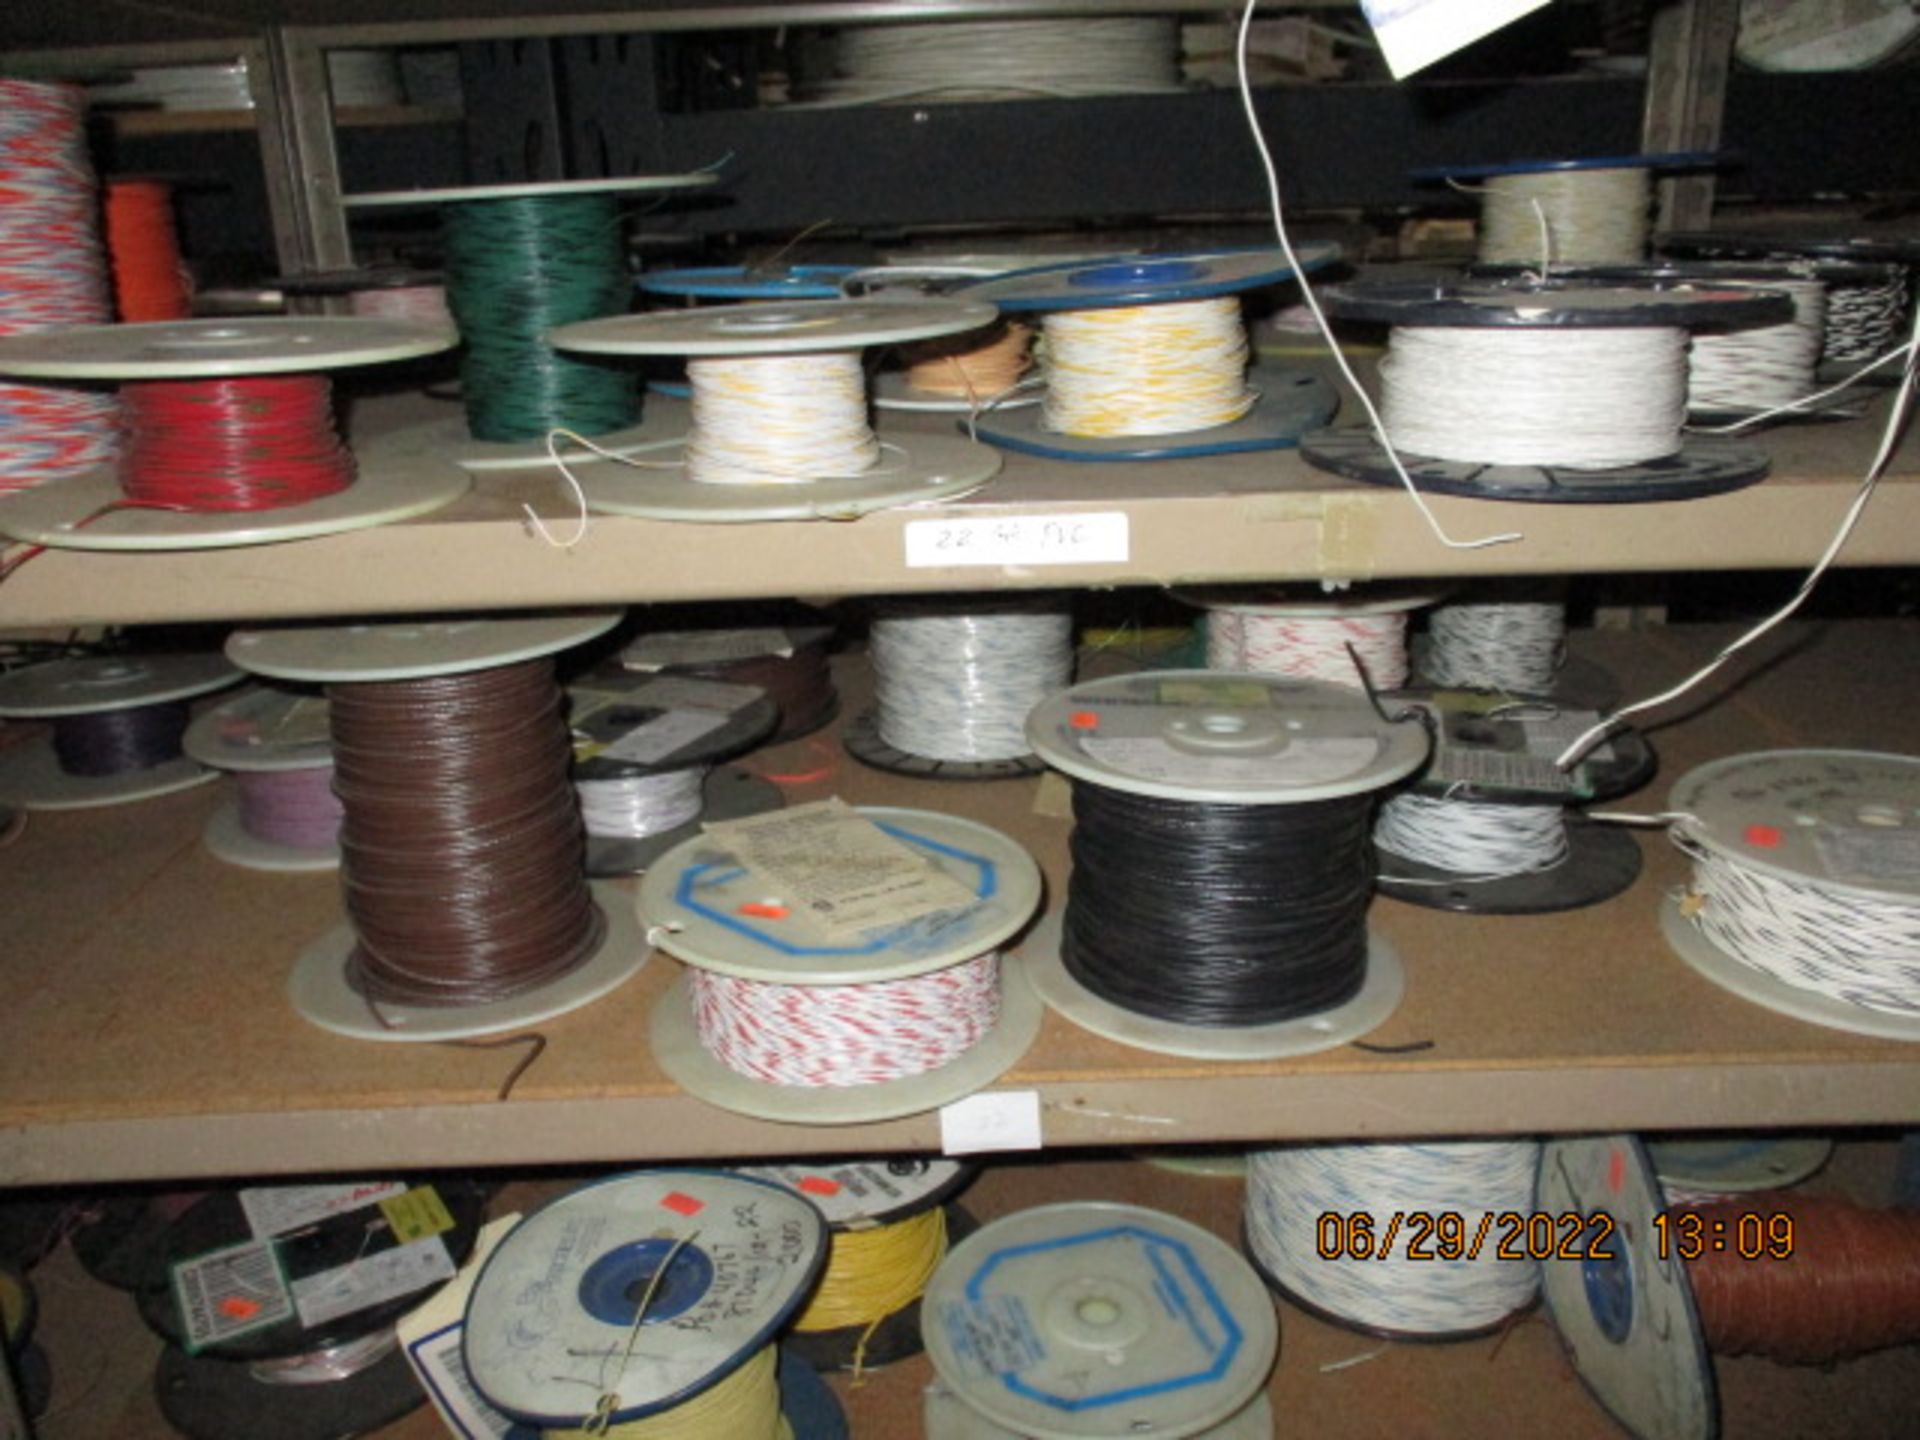 CONTENTS OF SHELVING UNIT CONSISTING OF ASSORTMENT OF CABLE/WIRE - Image 7 of 8